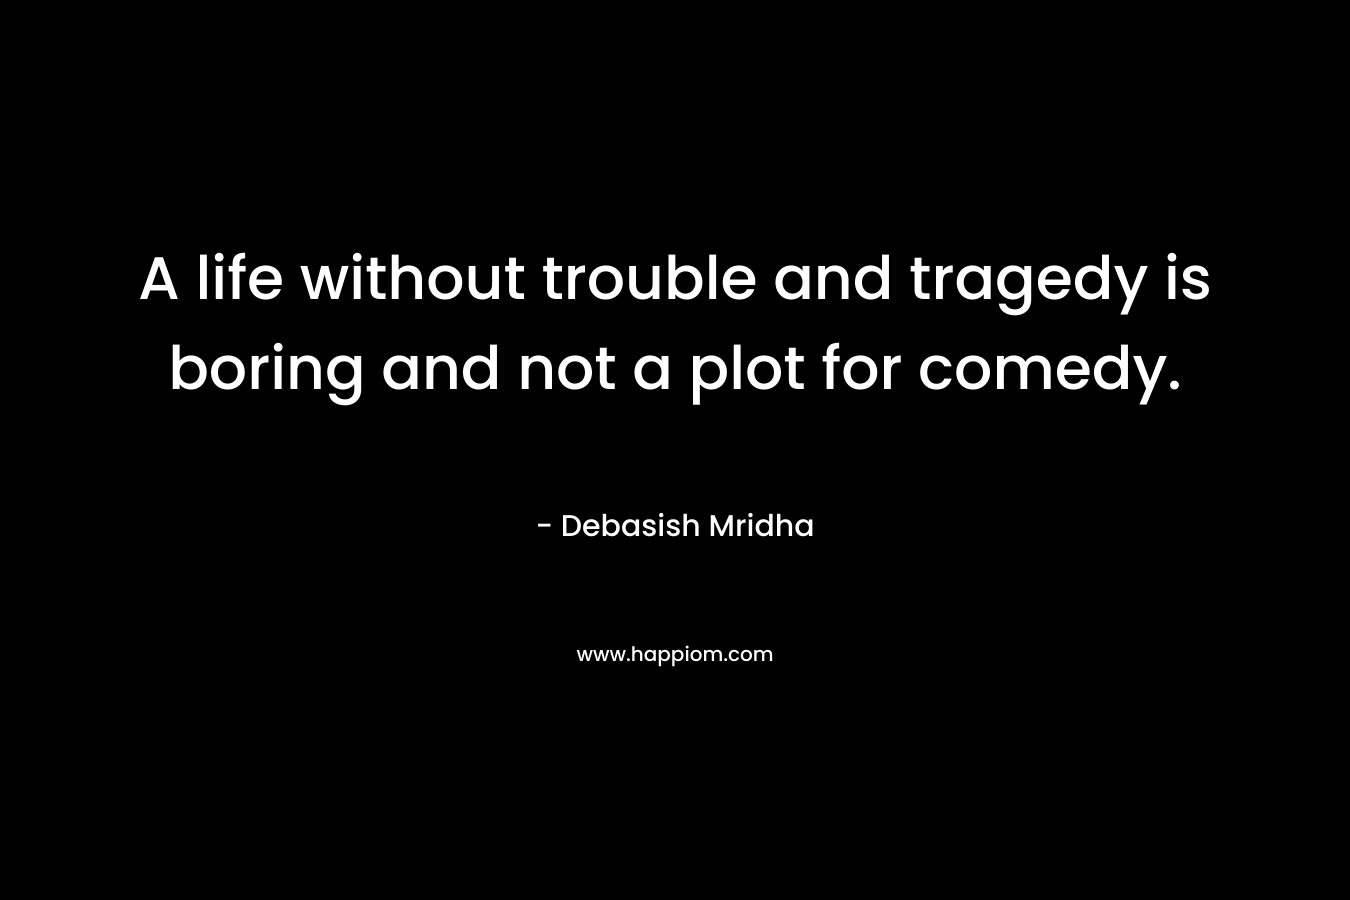 A life without trouble and tragedy is boring and not a plot for comedy.